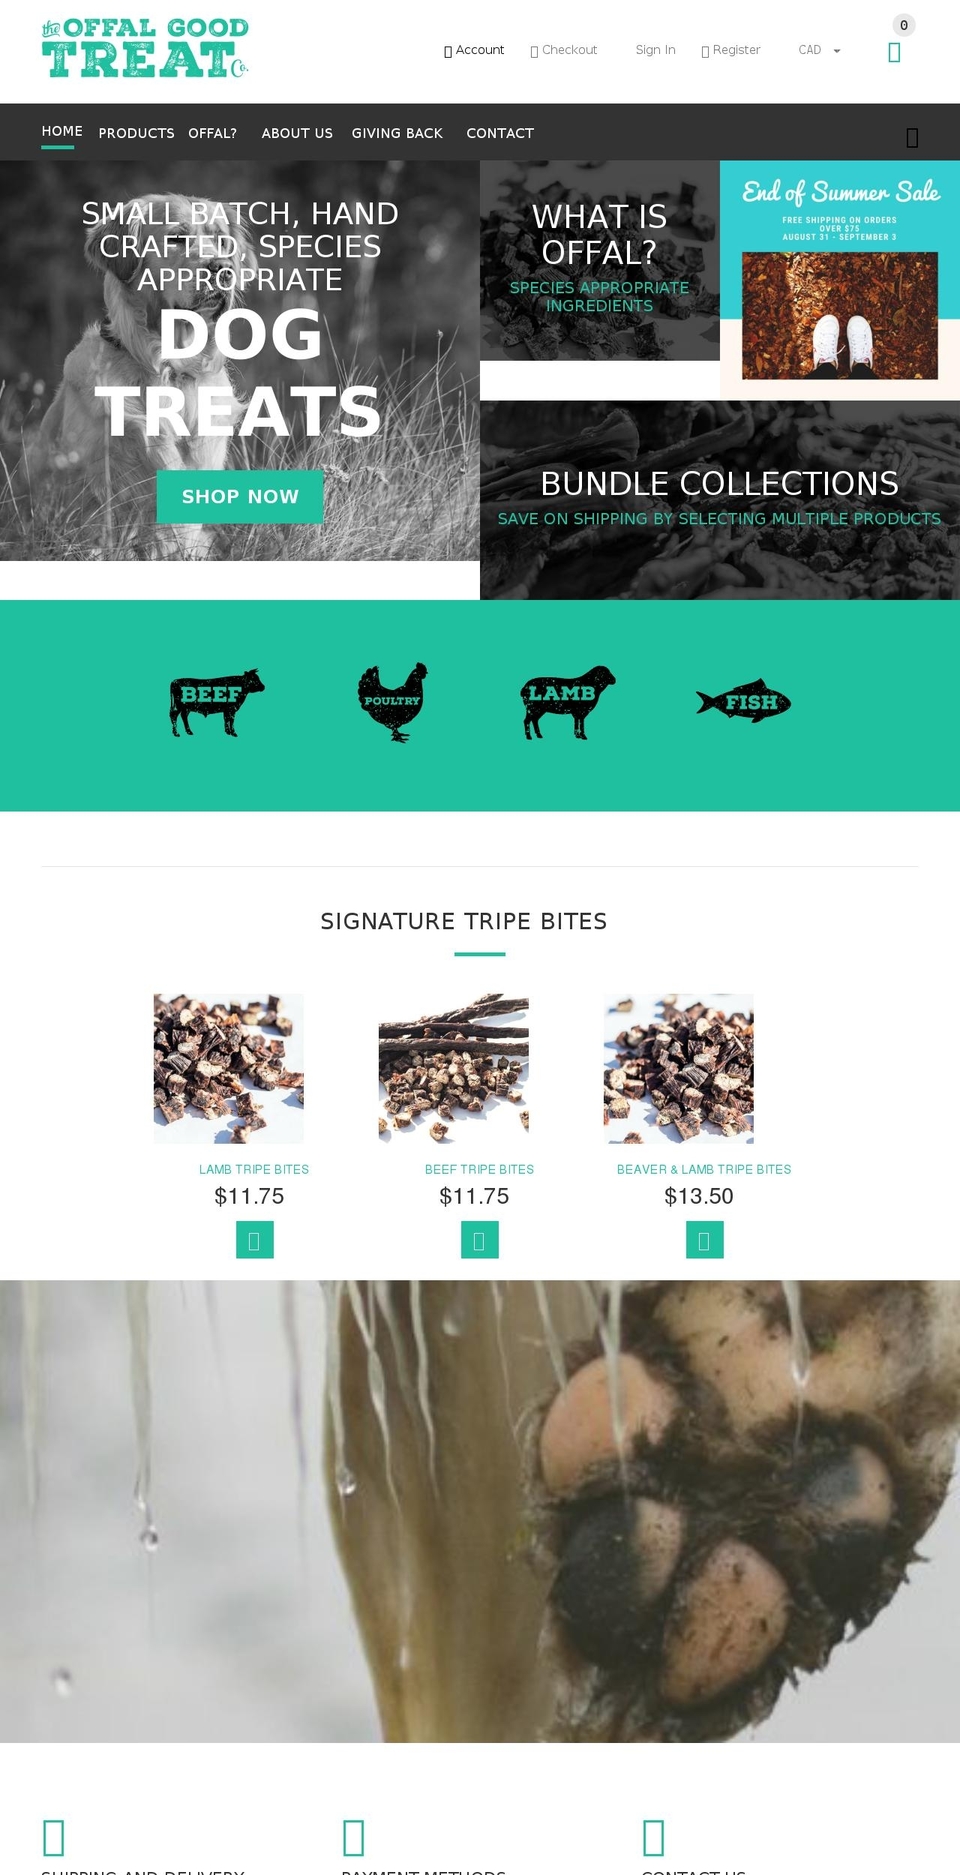 YourStore Shopify theme site example offalgoodtreats.com